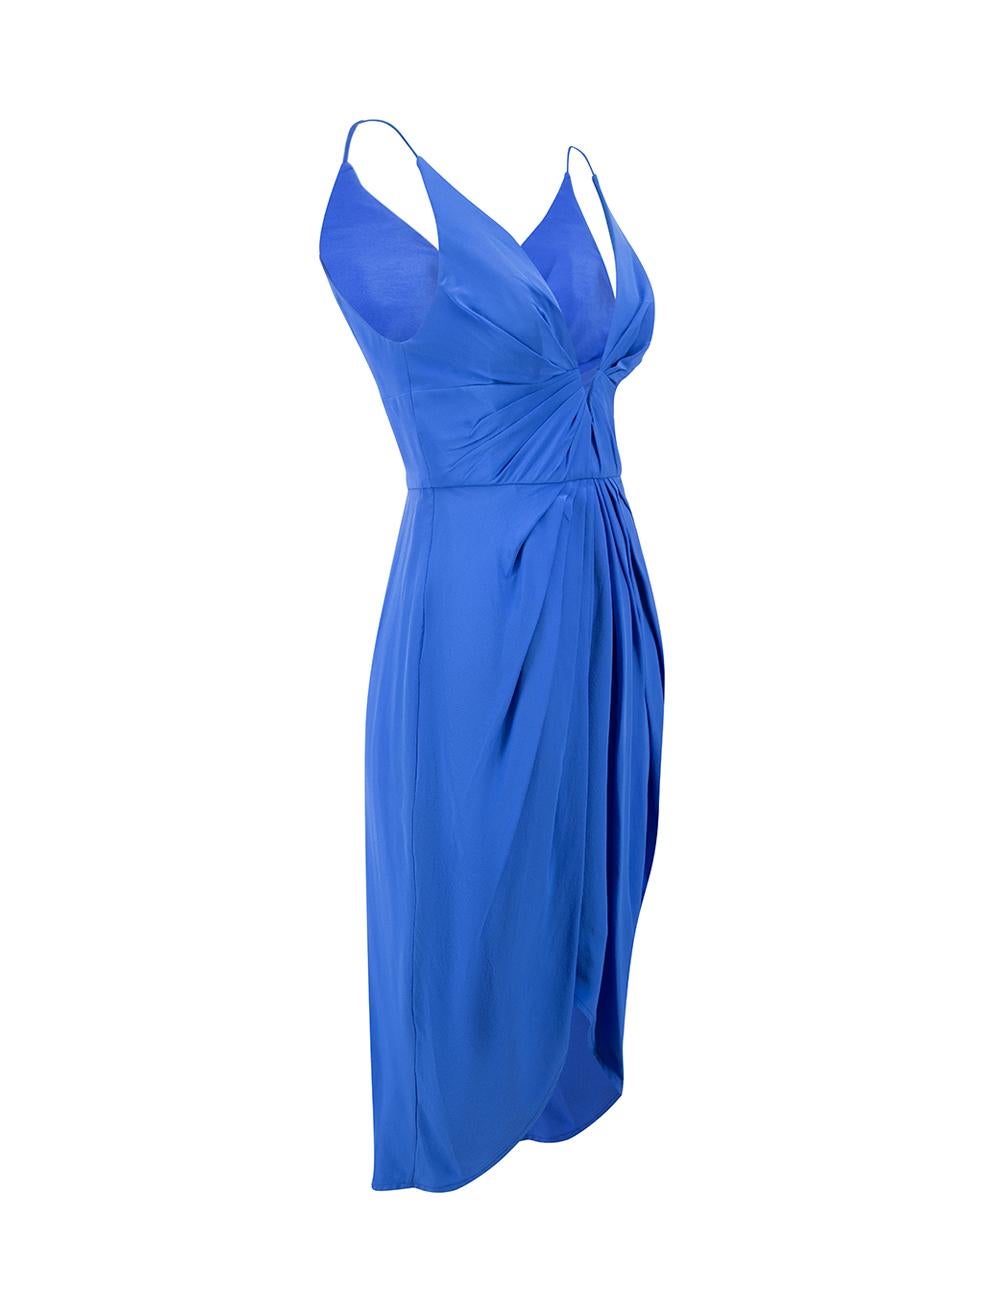 CONDITION is Never worn, with tags. No visible wear to dress is evident on this new Zimmermann designer resale item.

Details
Silk V Tuck
Blue
Silk
Dress
Sleeveless
Plunge neckline
Pleated detail
Mini
Back zip and hook fastening
Made in India